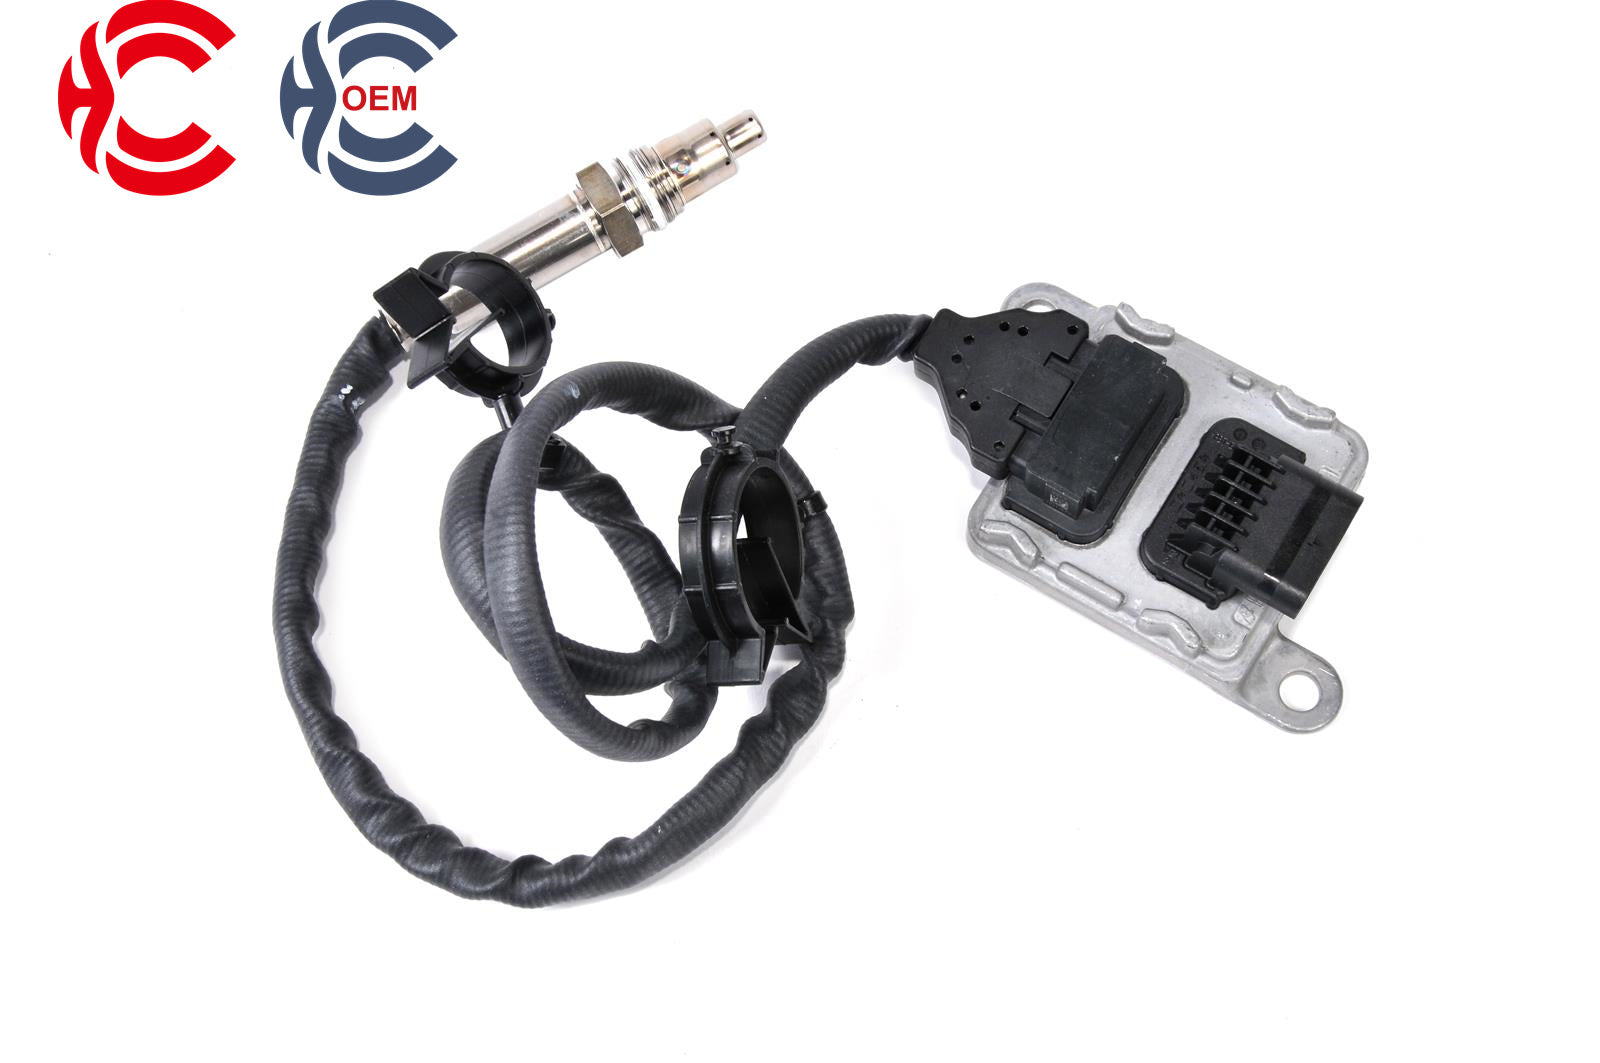 OEM: 5WK9 7390A 55495040Material: ABS metalColor: black silverOrigin: Made in ChinaWeight: 400gPacking List: 1* Nitrogen oxide sensor NOx More ServiceWe can provide OEM Manufacturing serviceWe can Be your one-step solution for Auto PartsWe can provide technical scheme for you Feel Free to Contact Us, We will get back to you as soon as possible.